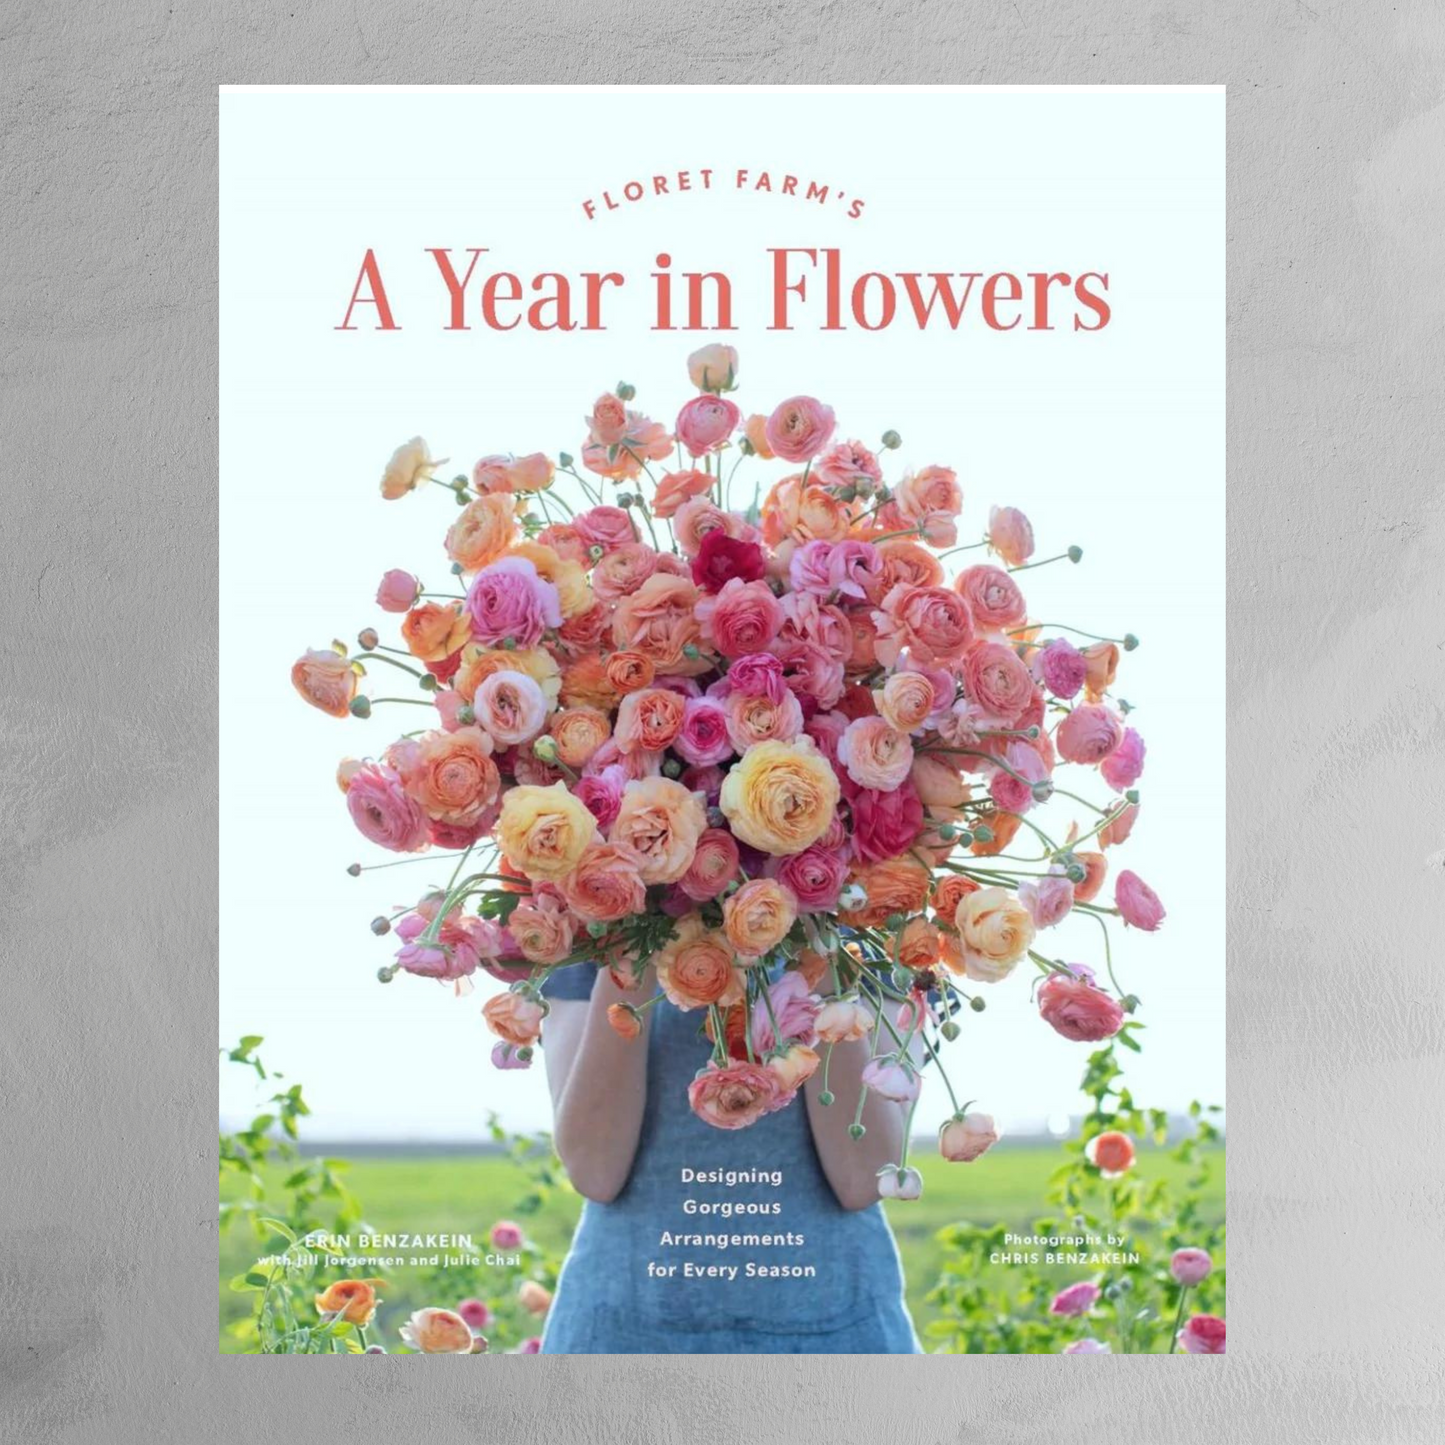 Book - A Year in Flowers: Designing Gorgeous Arrangements for Every Season